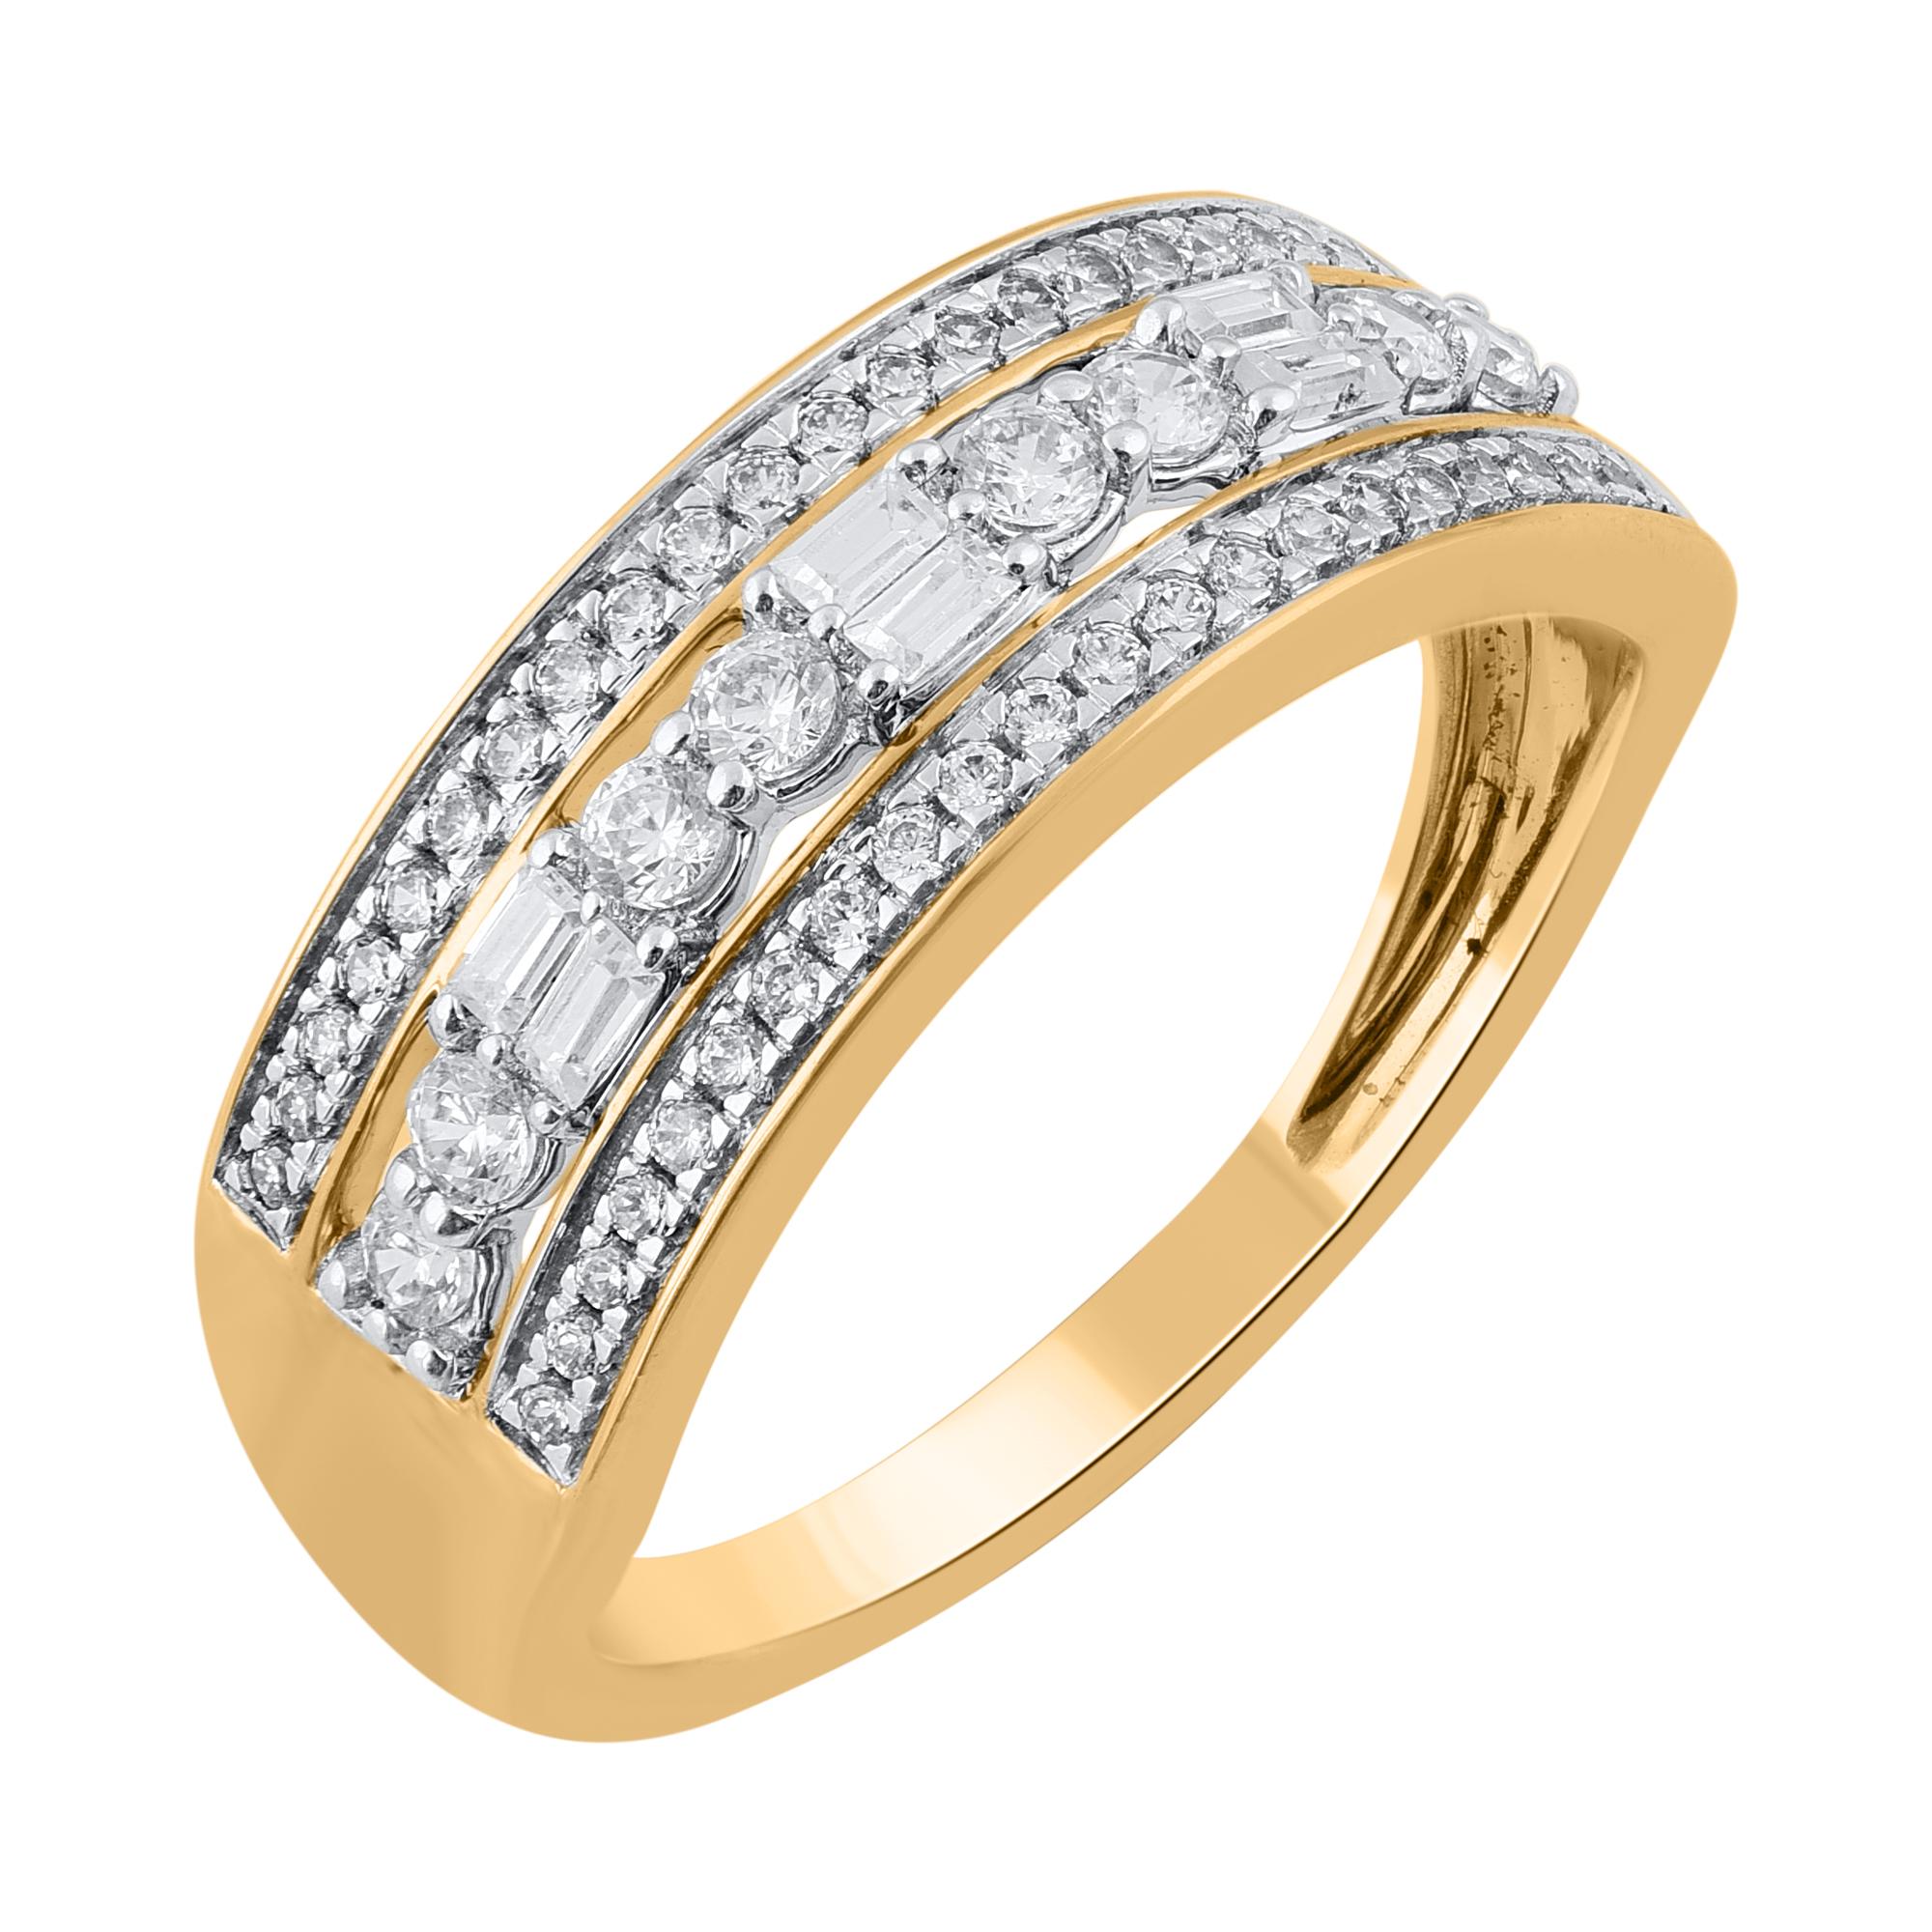 Dazzling and classic, this diamond band ring is anything but ordinary. These band ring are studded with 56 brilliant Cut, single Cut & baguette natural diamonds in 14KT yellow gold in pave and prong setting . The white diamonds are graded as H-I